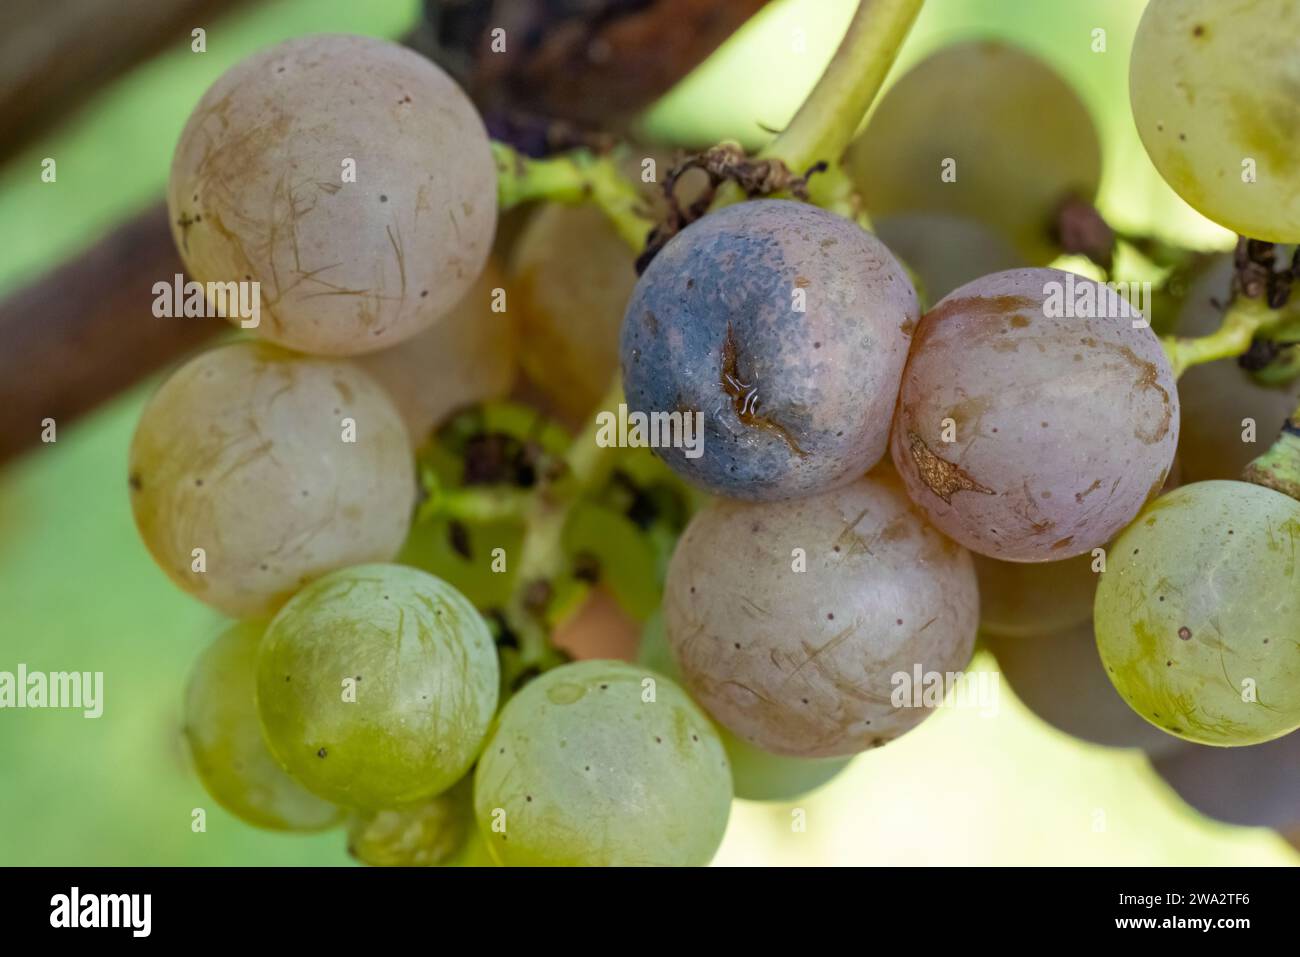 Grapes infested with rot and mold (black spotting) Stock Photo